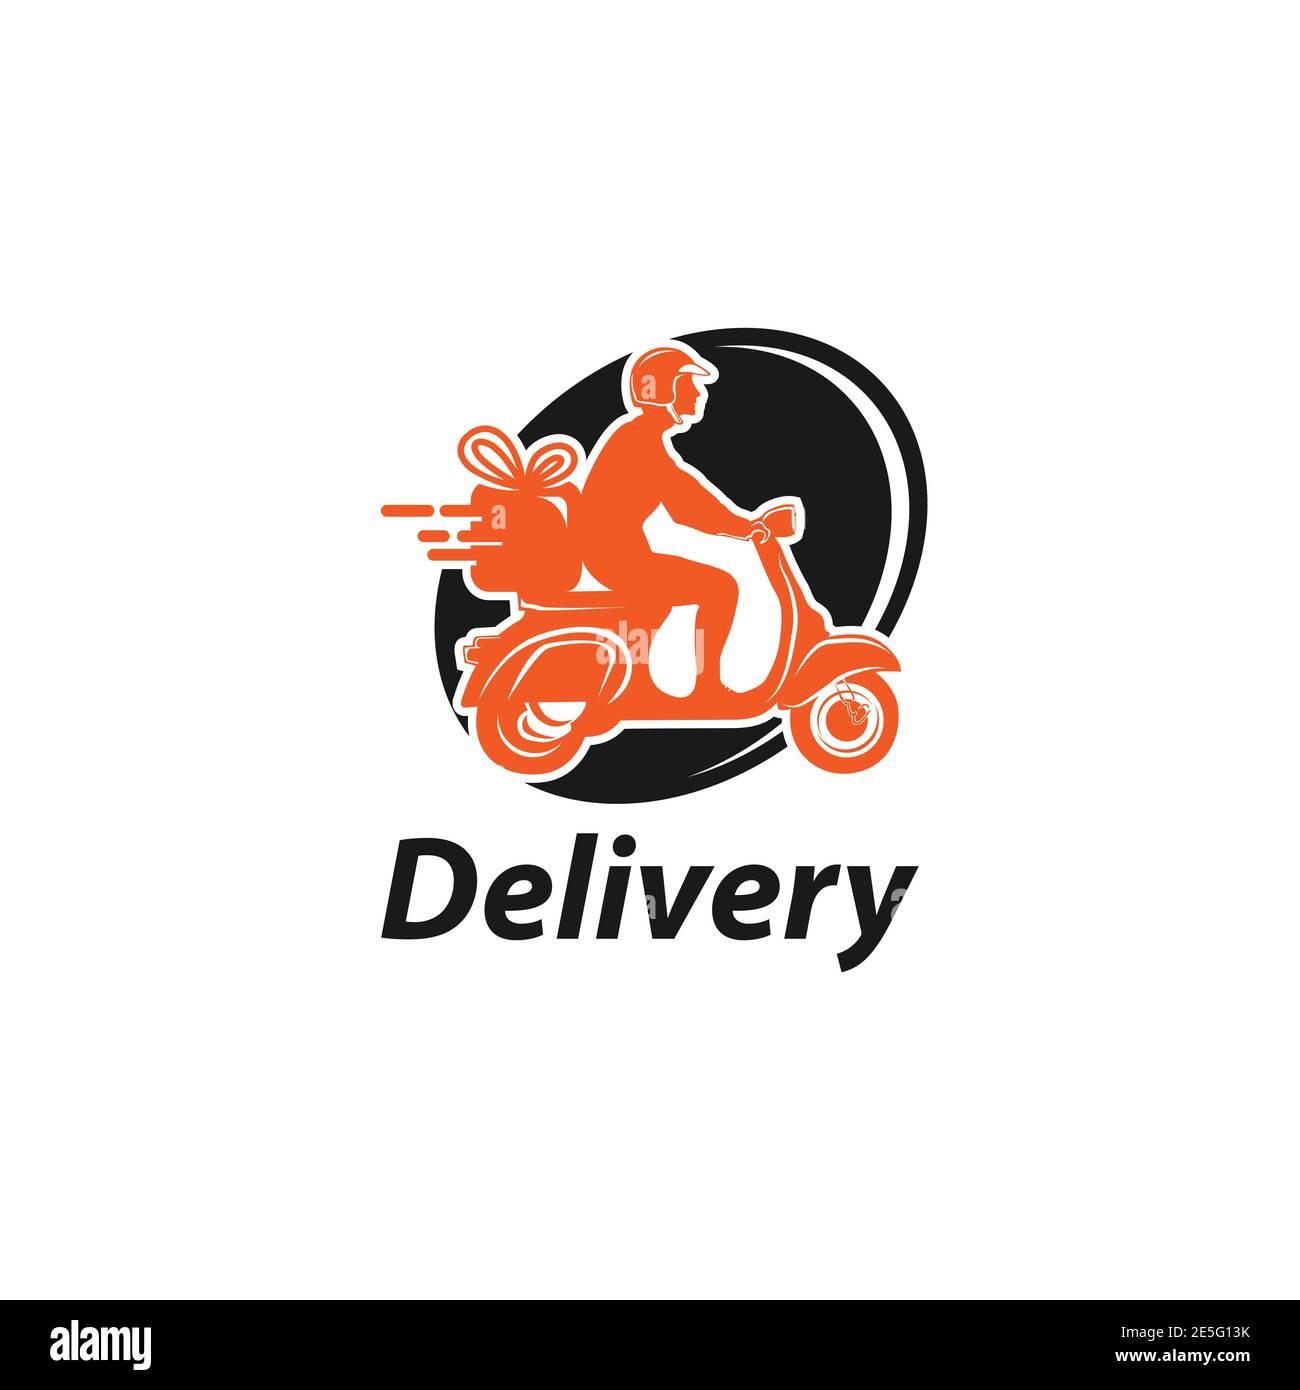 Express Ground Postal Service by Scooter Concept, Courier Service Man Vector Icon Design Stock Vector